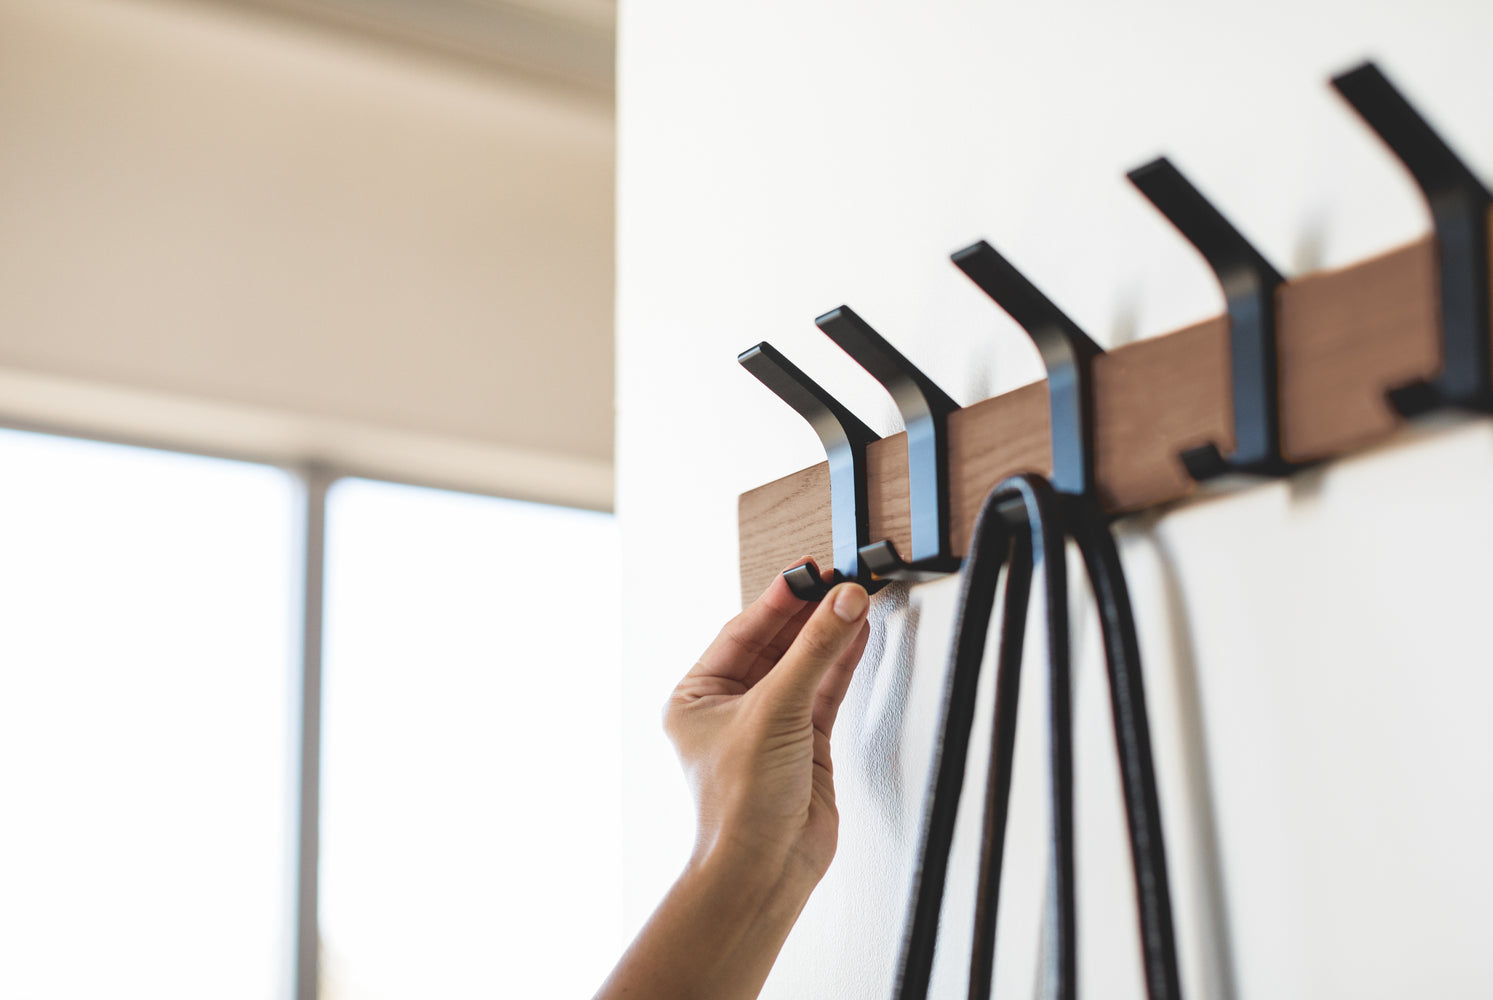 View 10 - Close up view of walnut Wall-Mounted Coat Hanger hooks holding bag by Yamazaki Home.